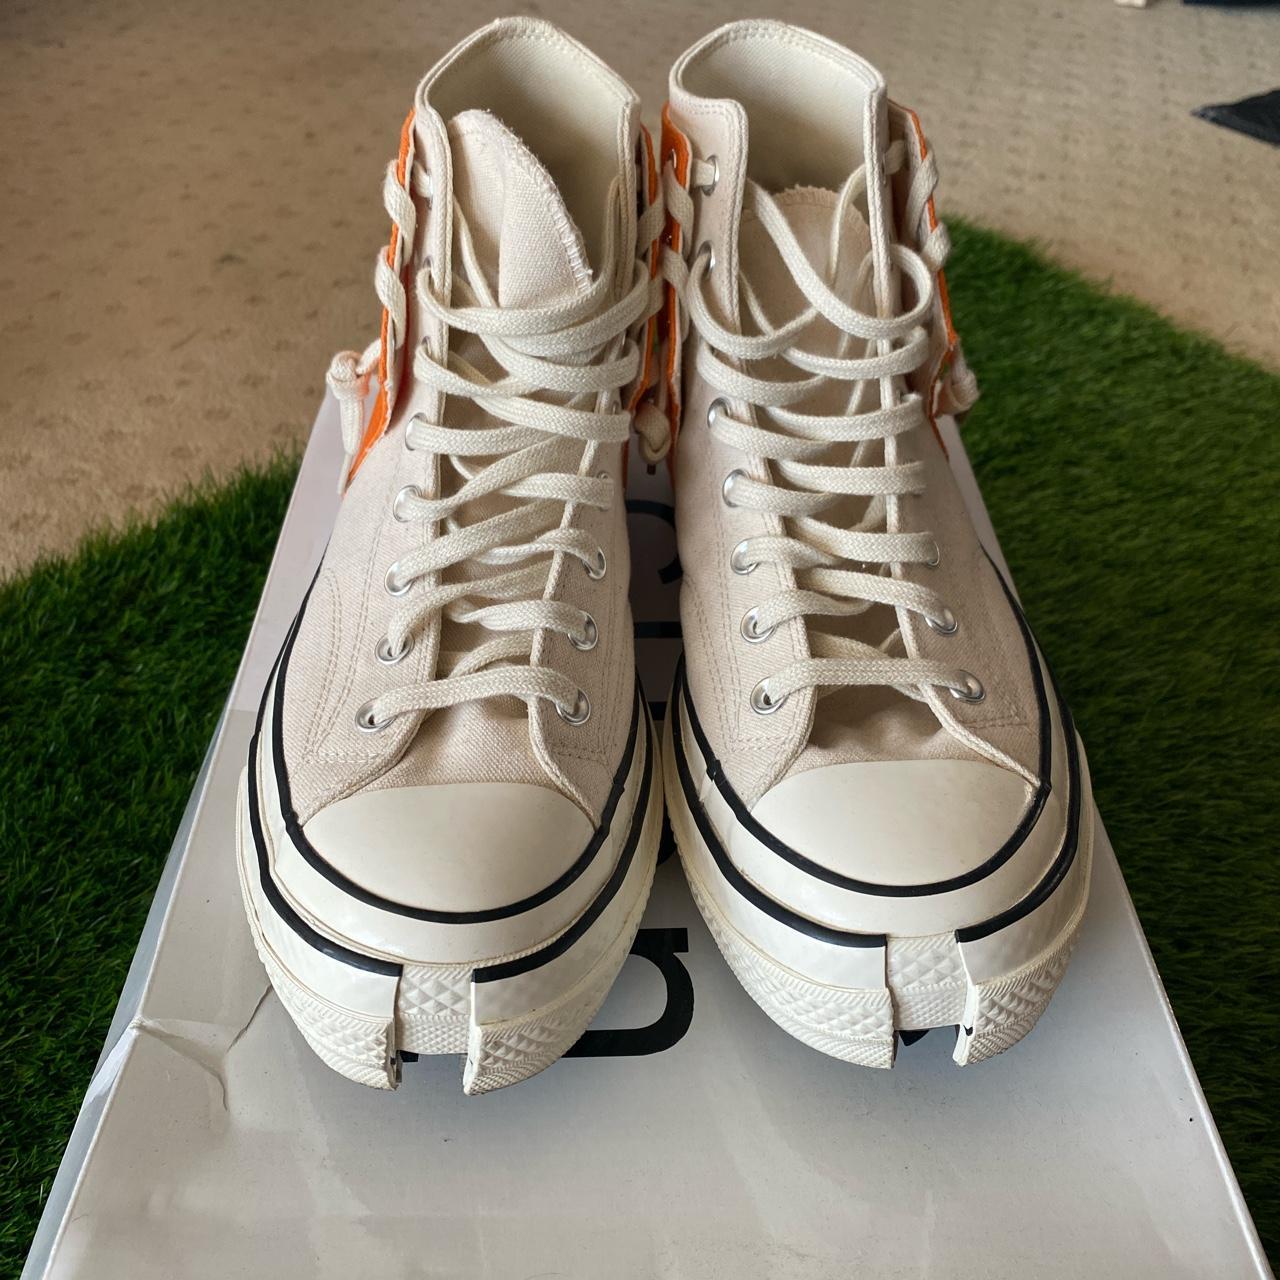 Feng Chen Wang Men's Cream and Orange Trainers (2)